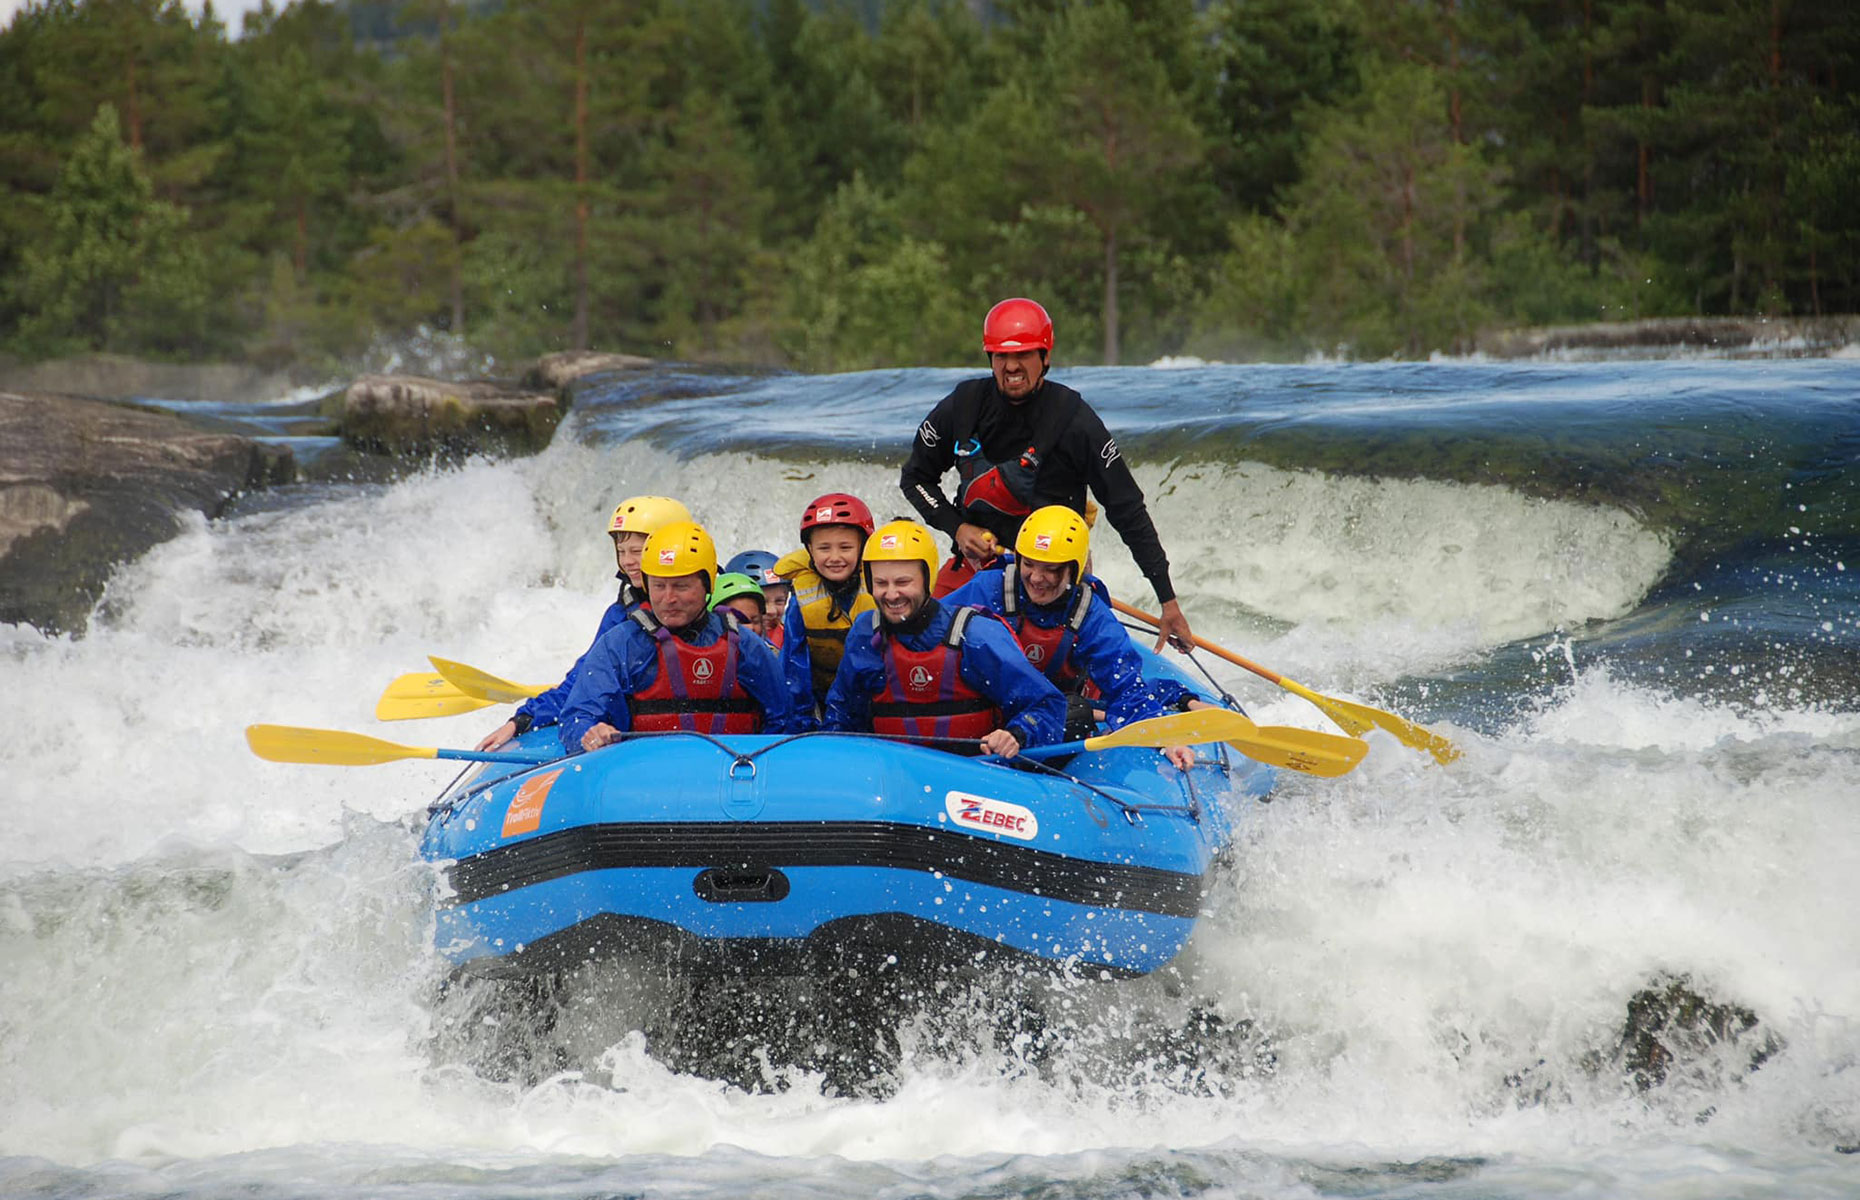 Rafting on the River Otra, south Norwayy